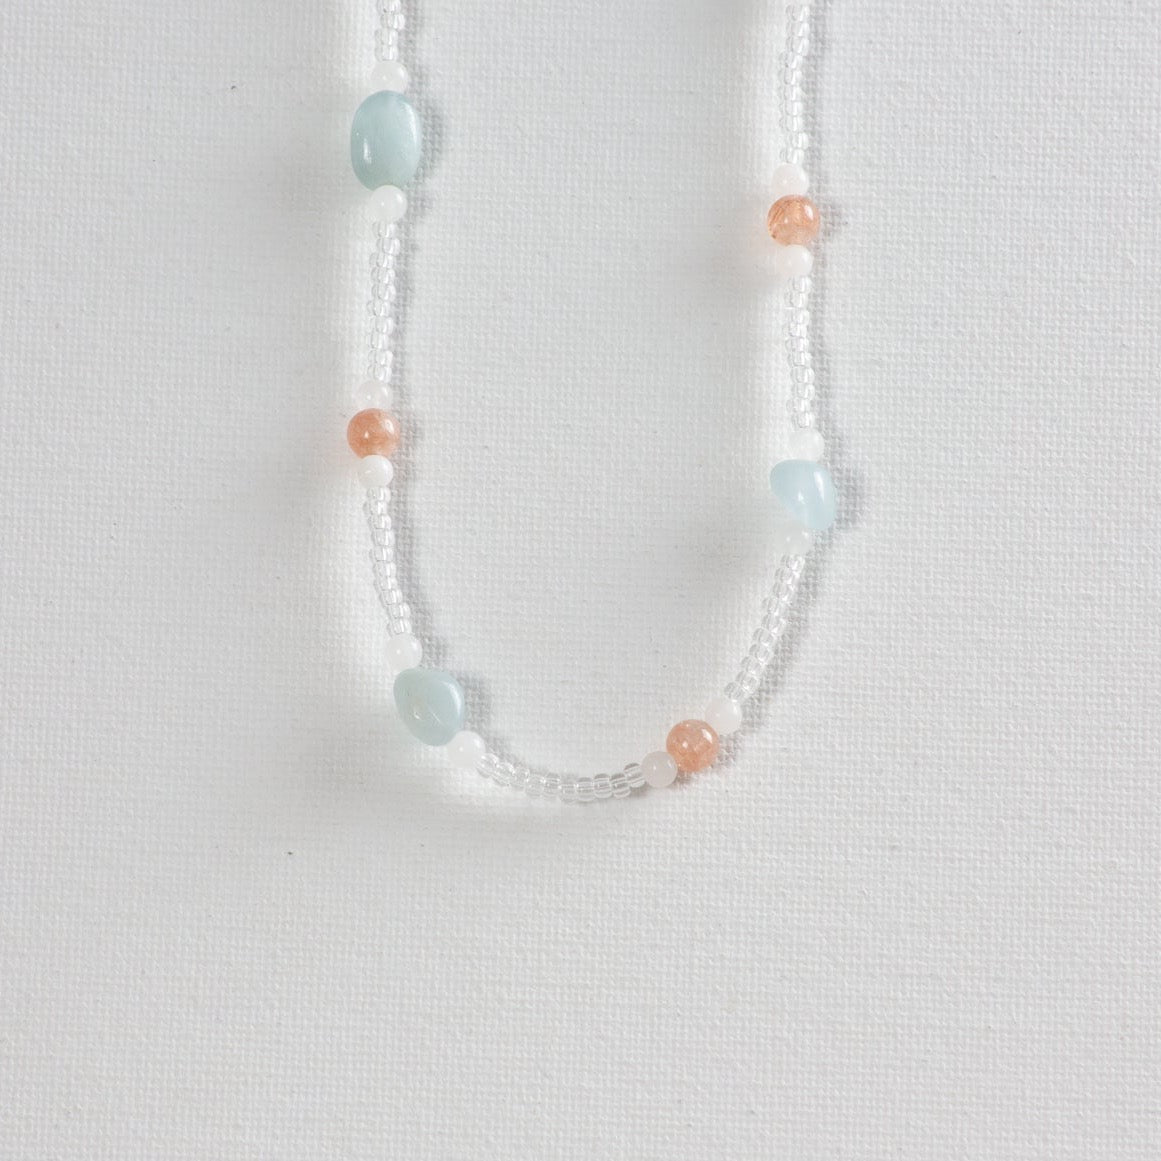 Predominantly clear beads with accents of soft pink and pastel blue glass beads on a white background.